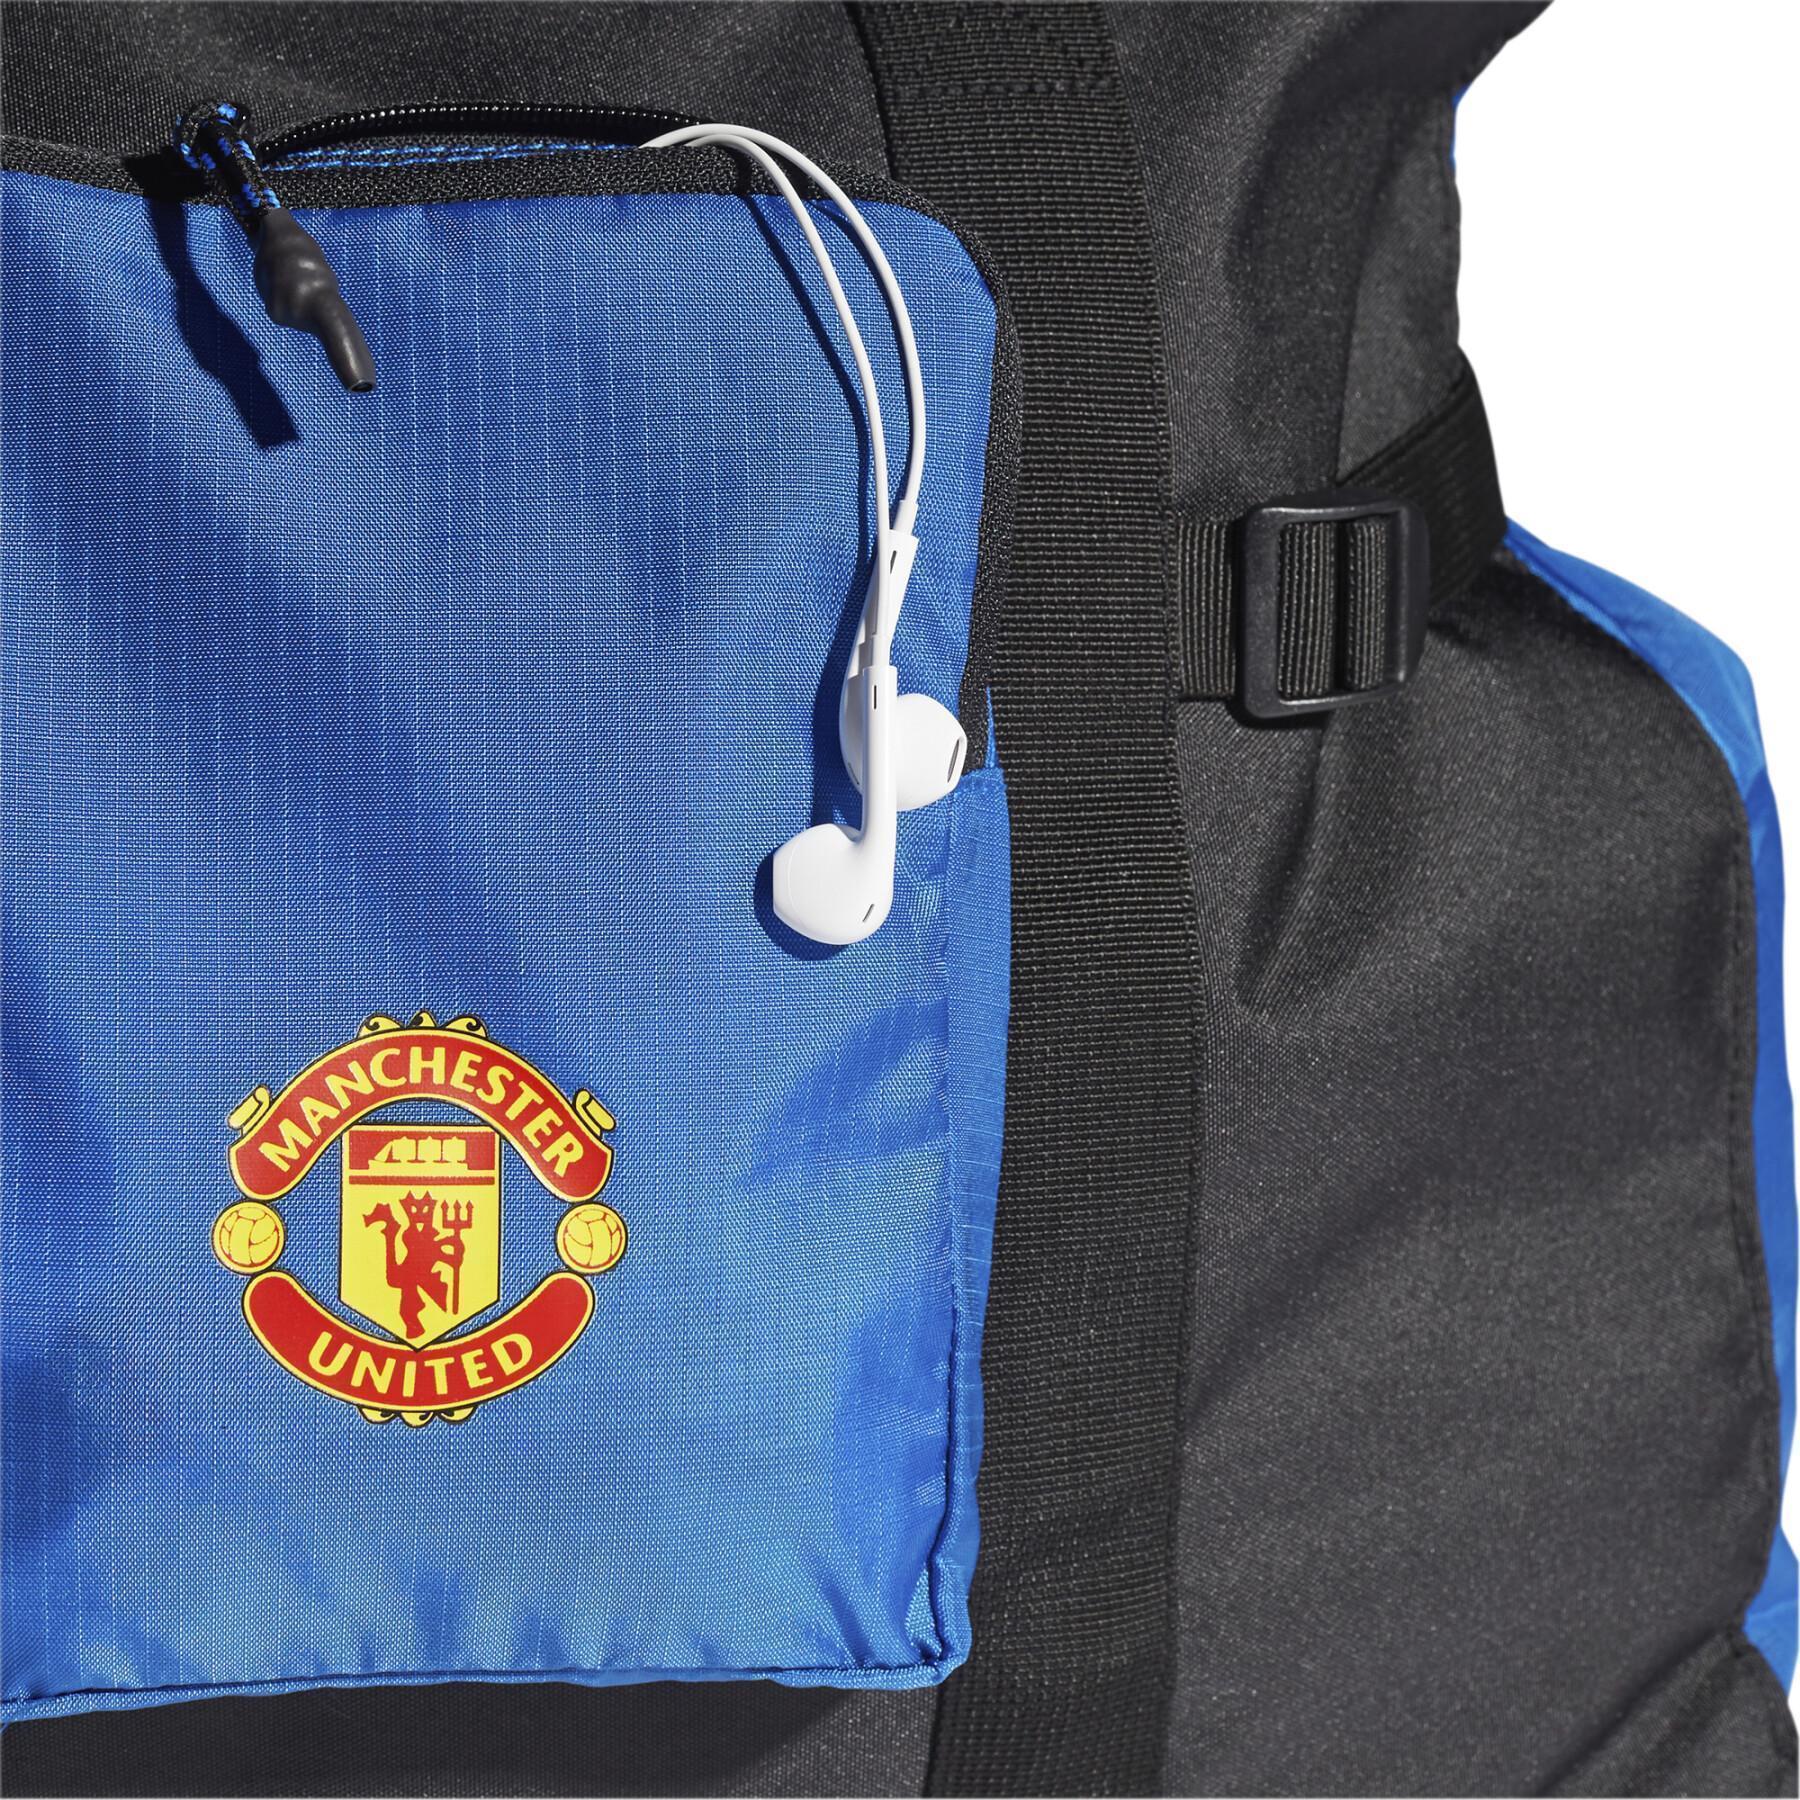 Torba Manchester United Tote